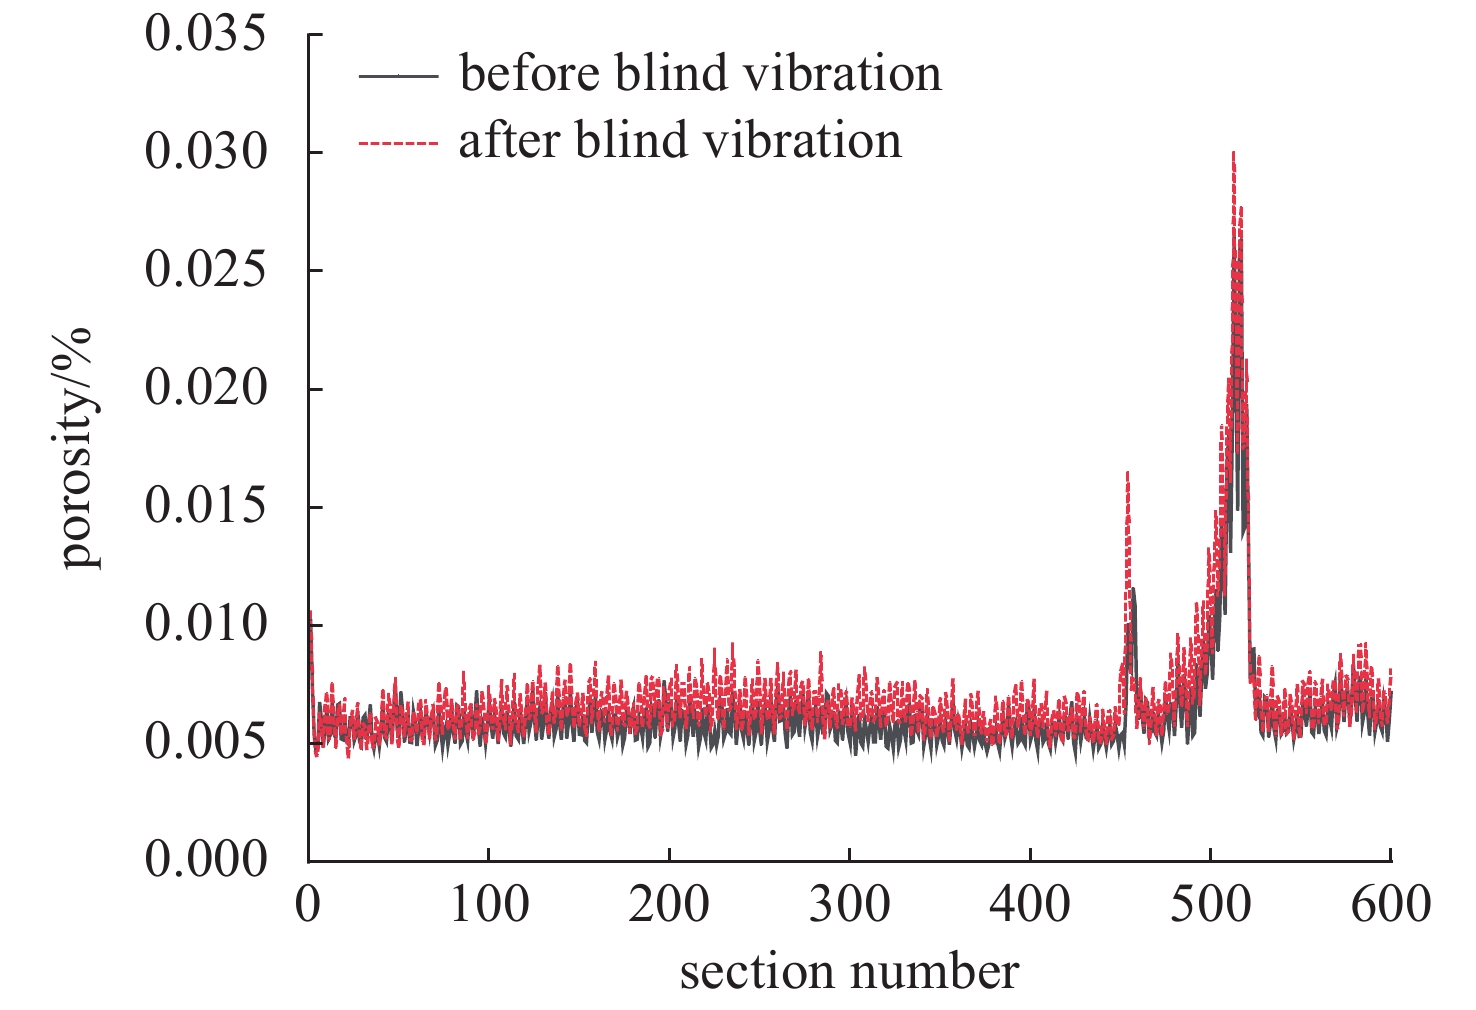 Changes in porosity before and after blind vibration